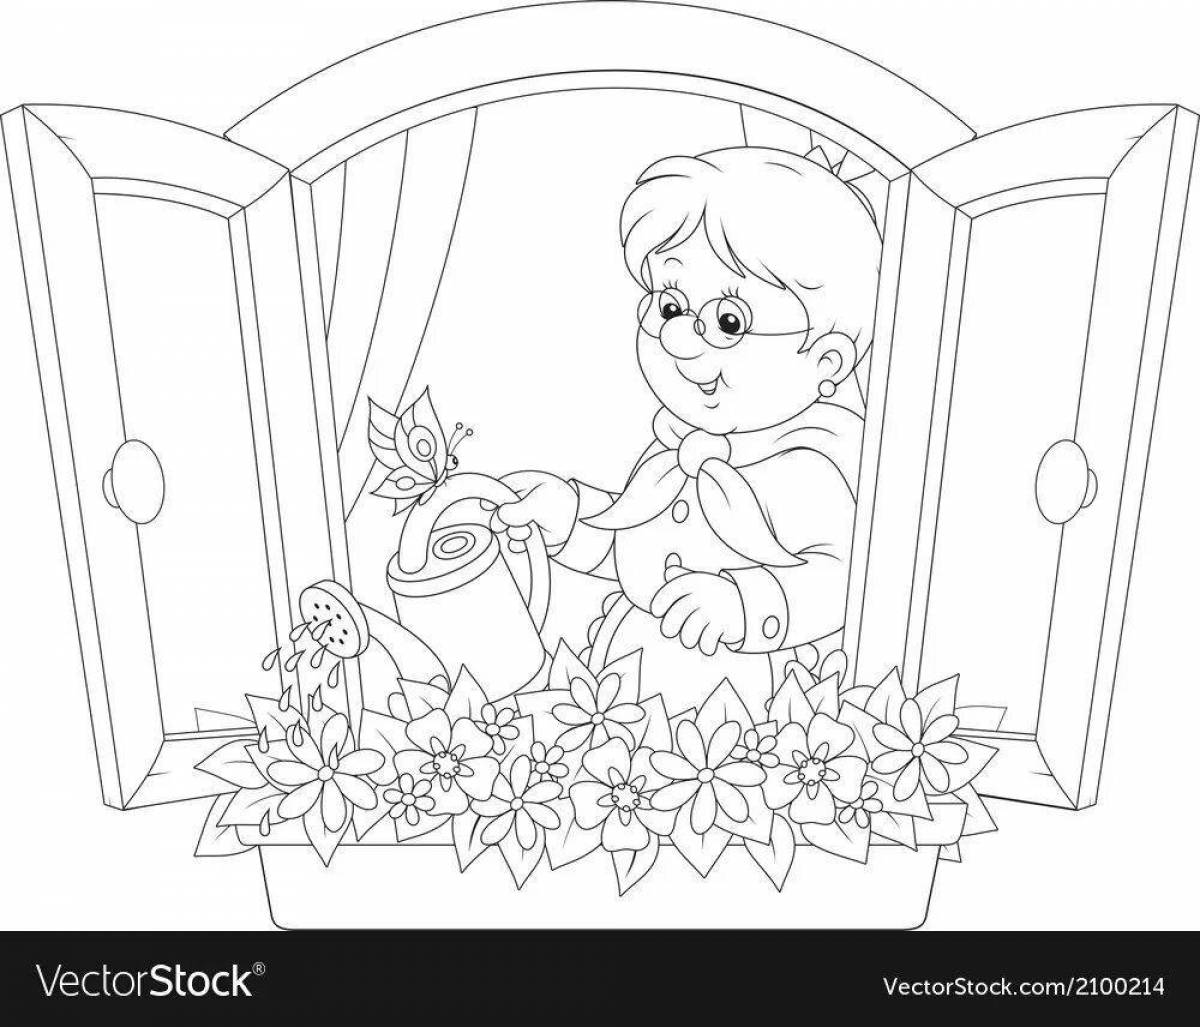 Delight window coloring page for children